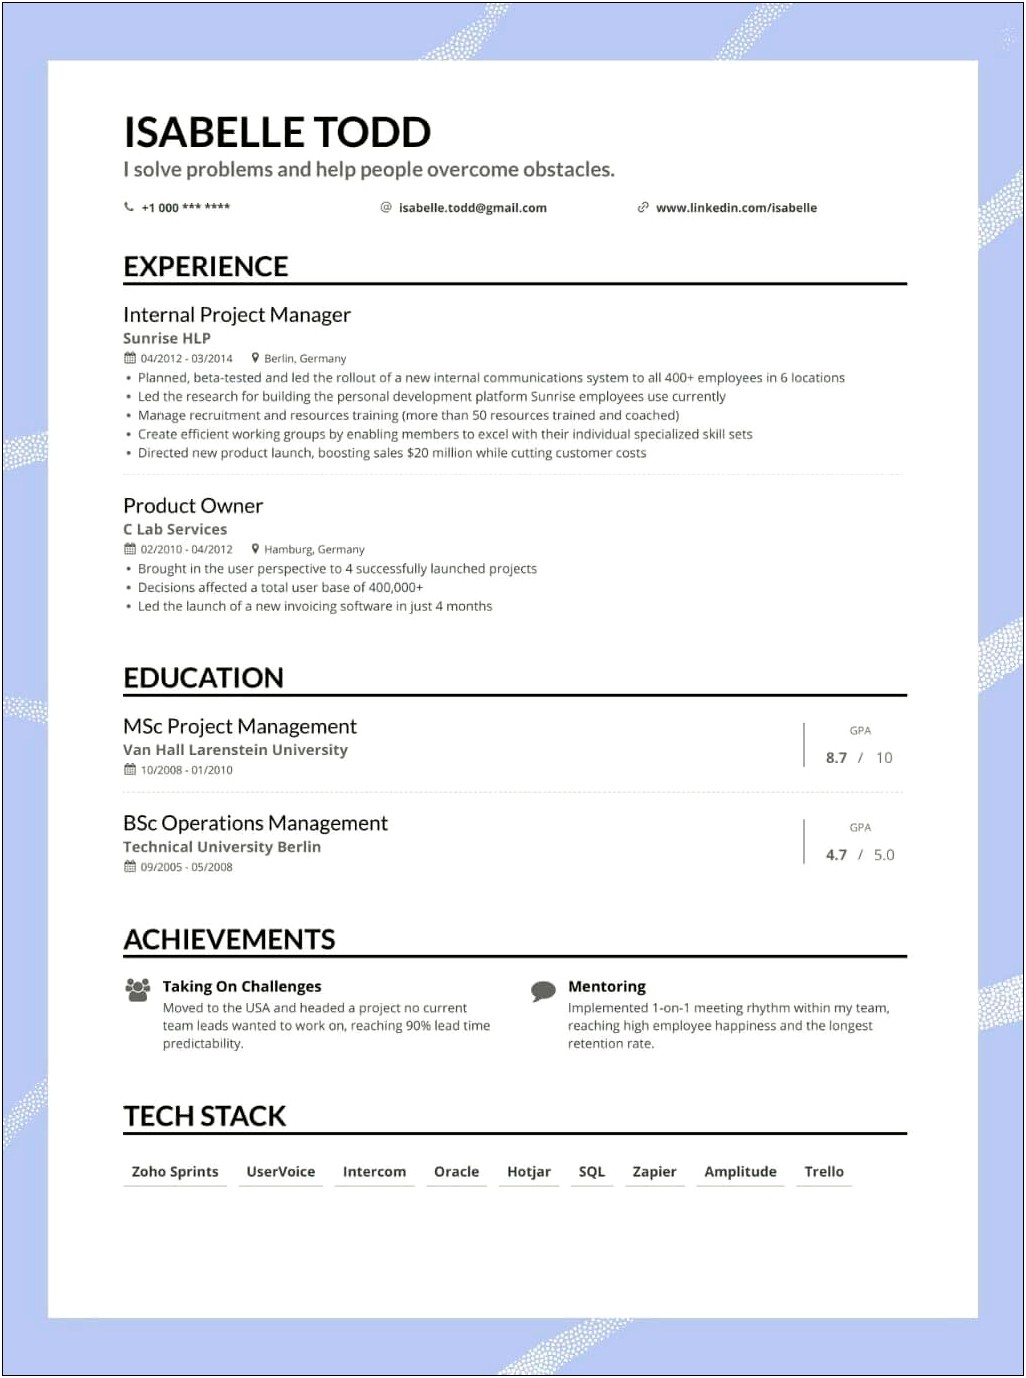 Listing Temp Jobs On Your Resume